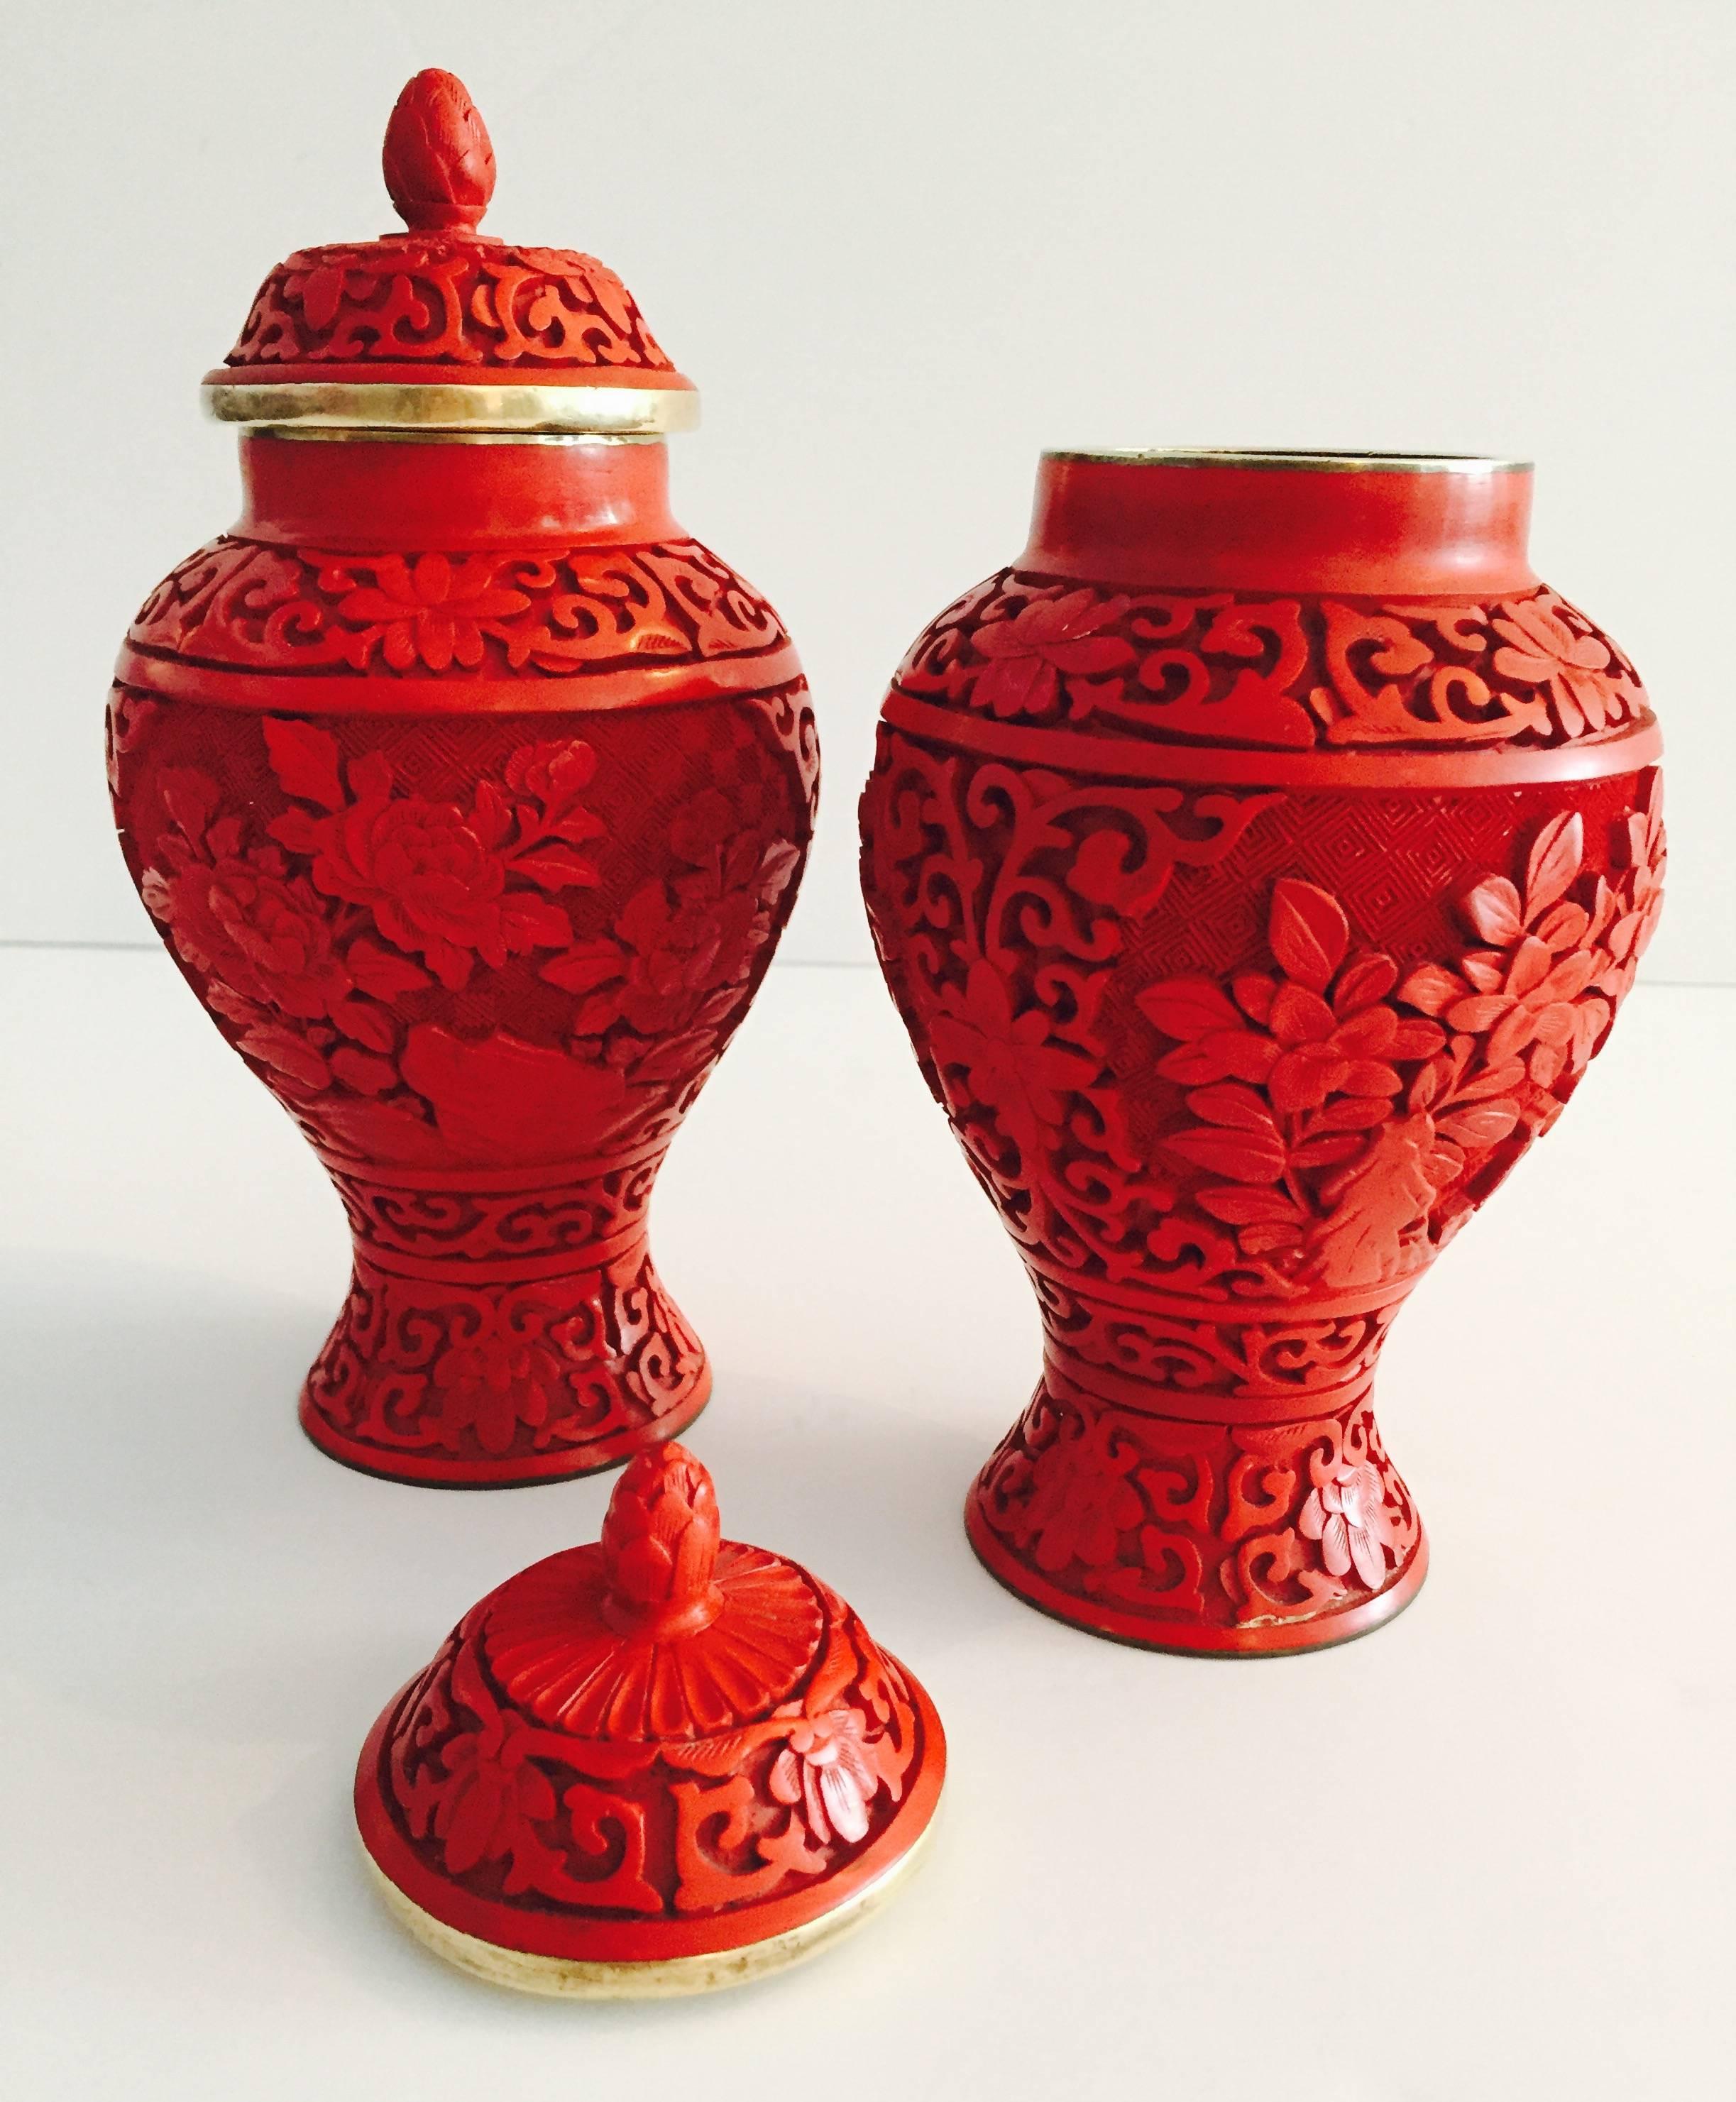 Chinoiserie Pair of Chinese Cinnabar and Cloisonné Lidded Jars